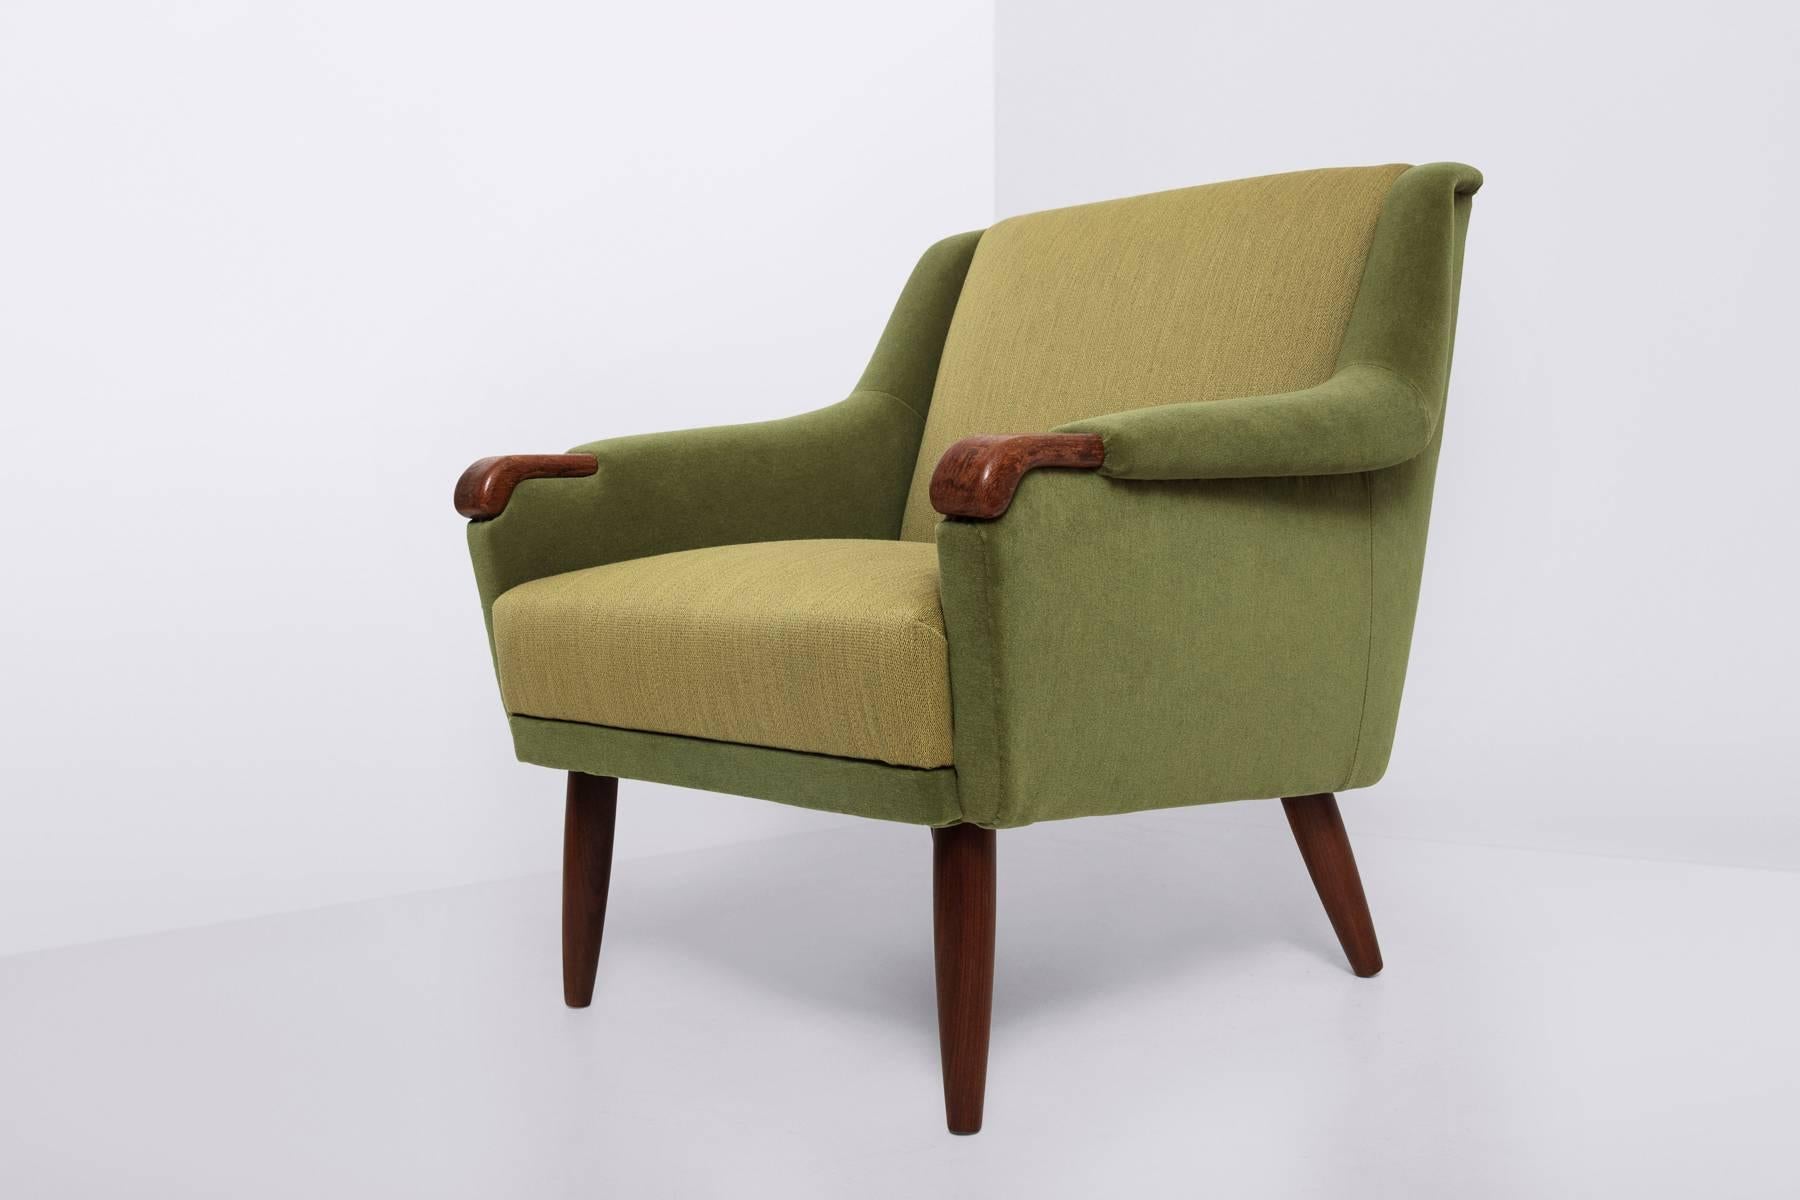 Legs in solid teak, exposed paws of oak
Two-toned green velvet and wool upholstery by Kvadrat.